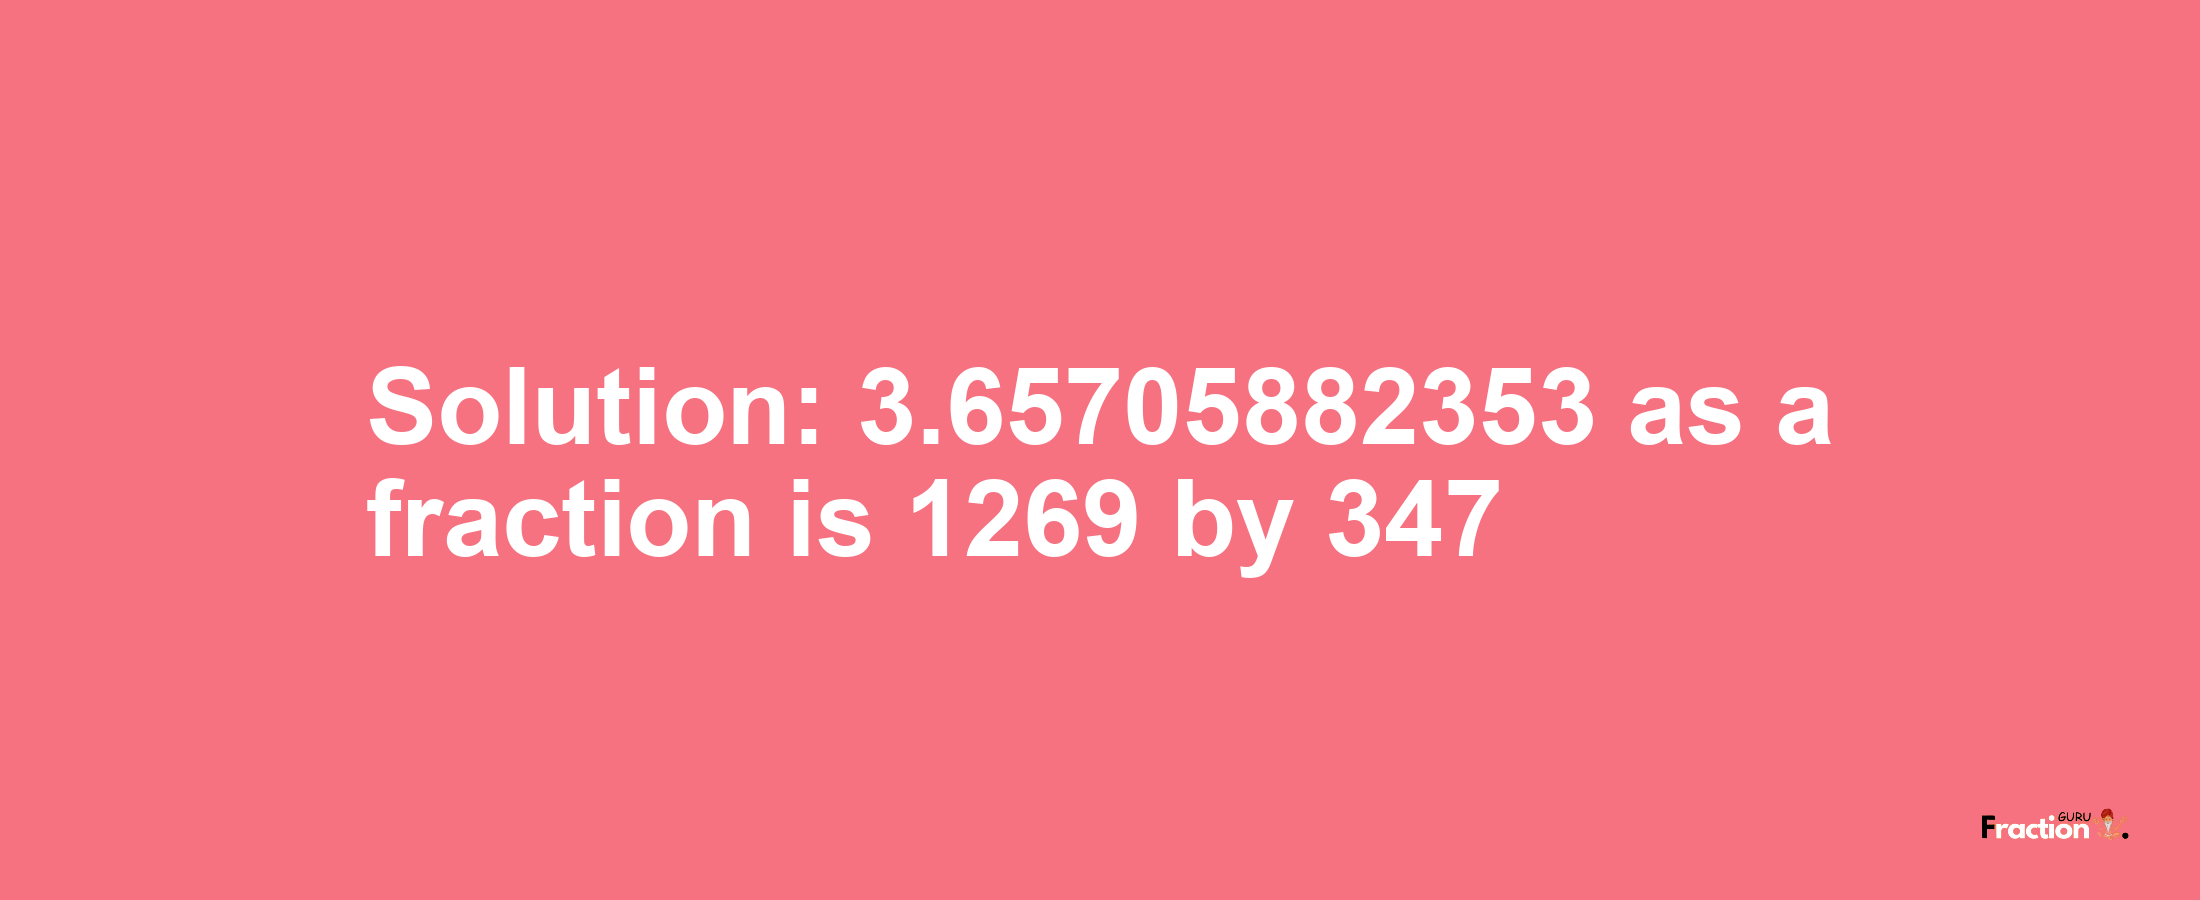 Solution:3.65705882353 as a fraction is 1269/347